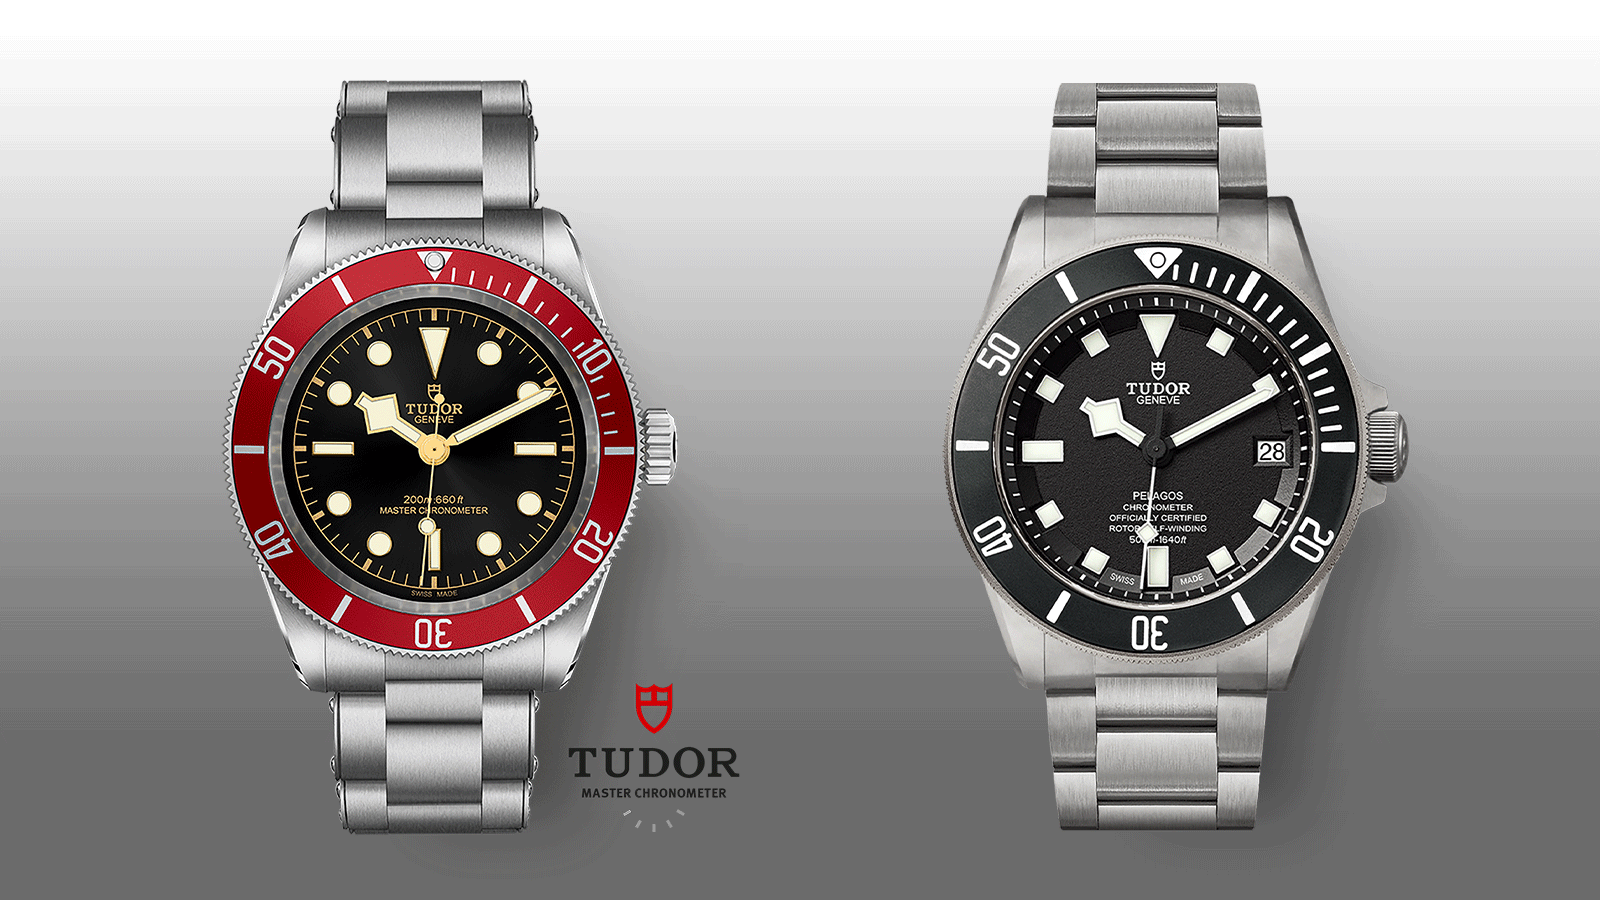 Size comparison of the Black bay (Left) and the Pelagos (Right).